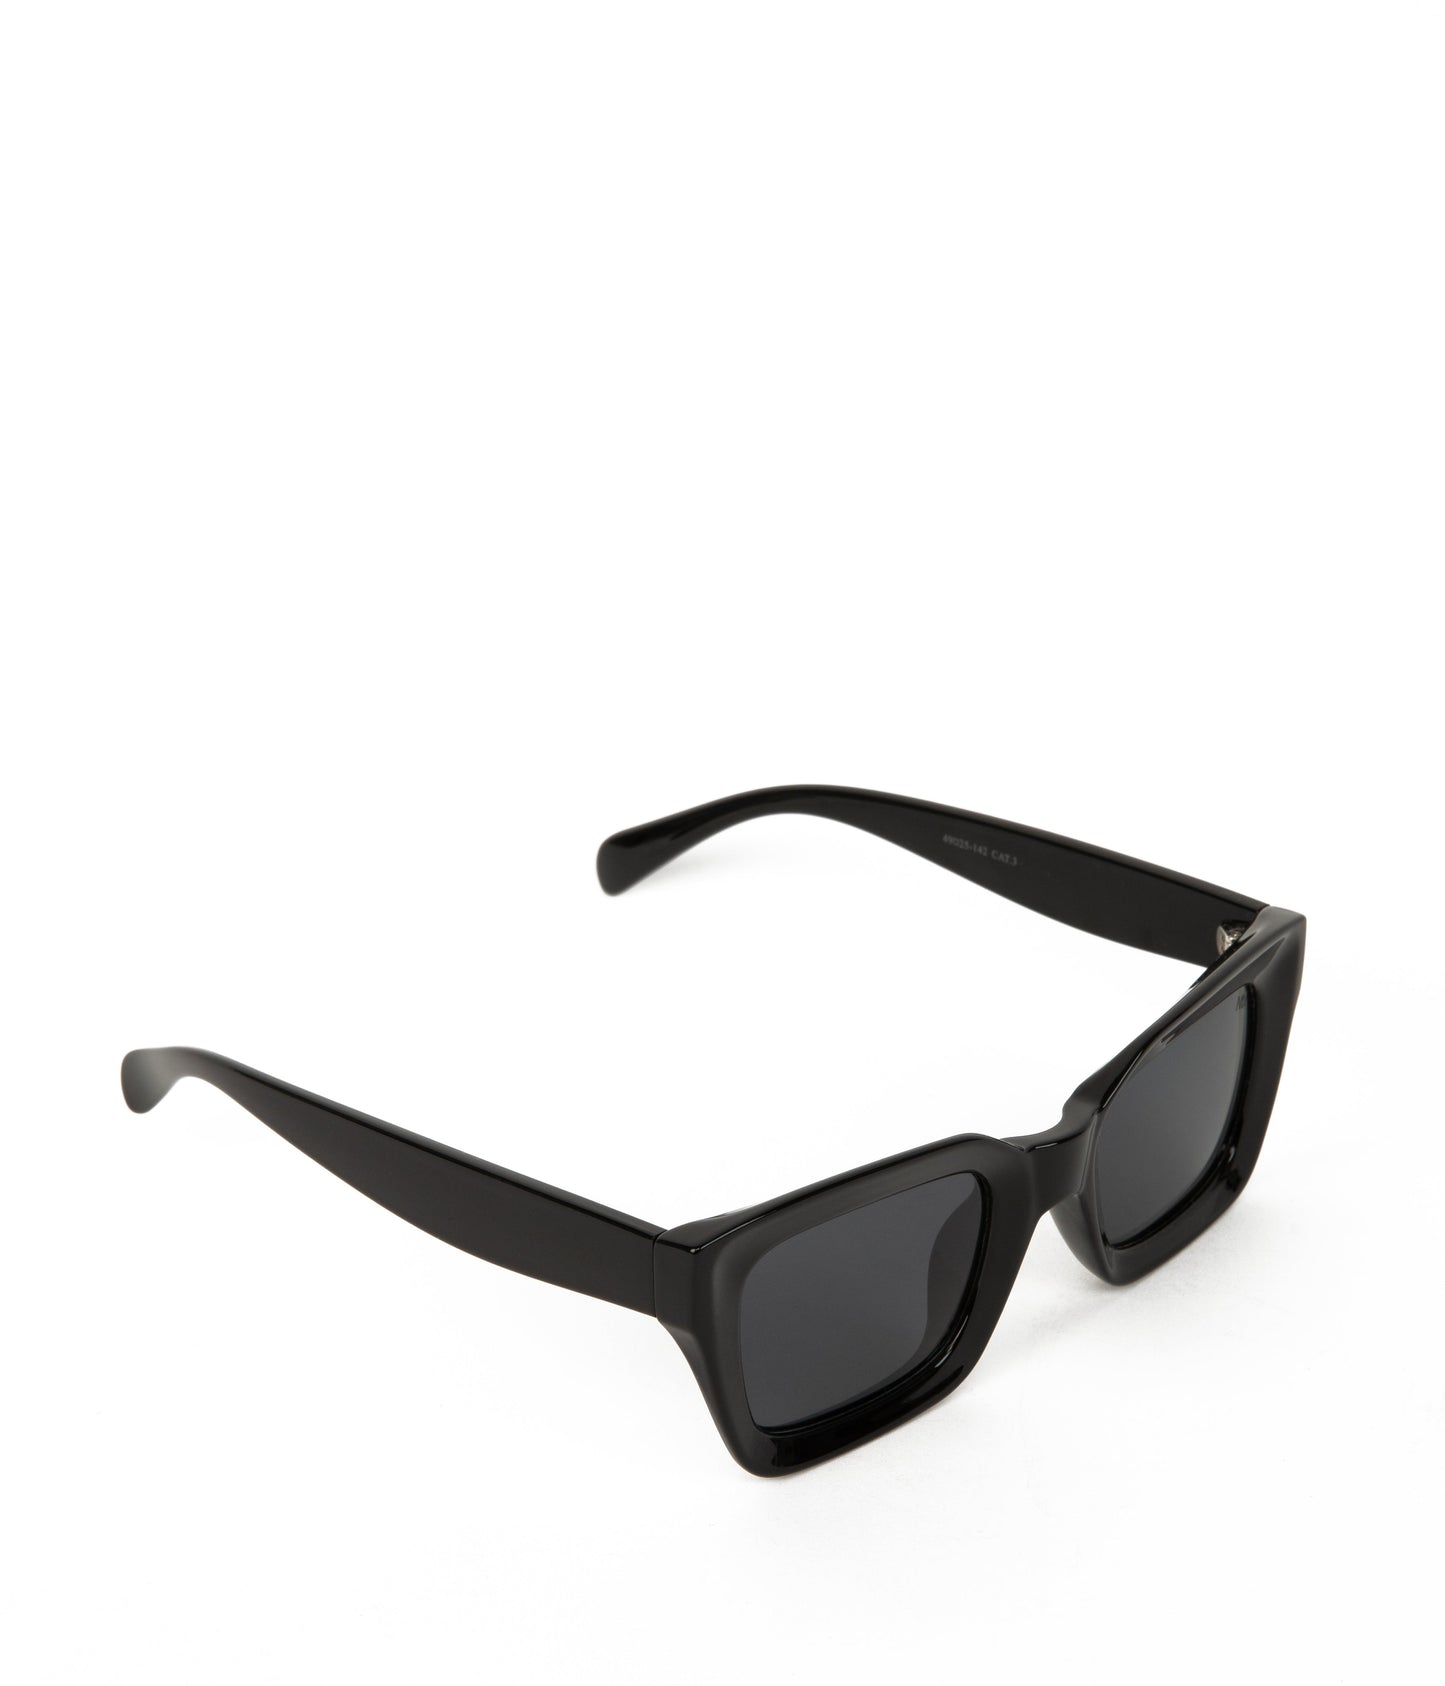 MEHA-2 Recycled Square Sunglasses | Color: Black, Grey - variant::black